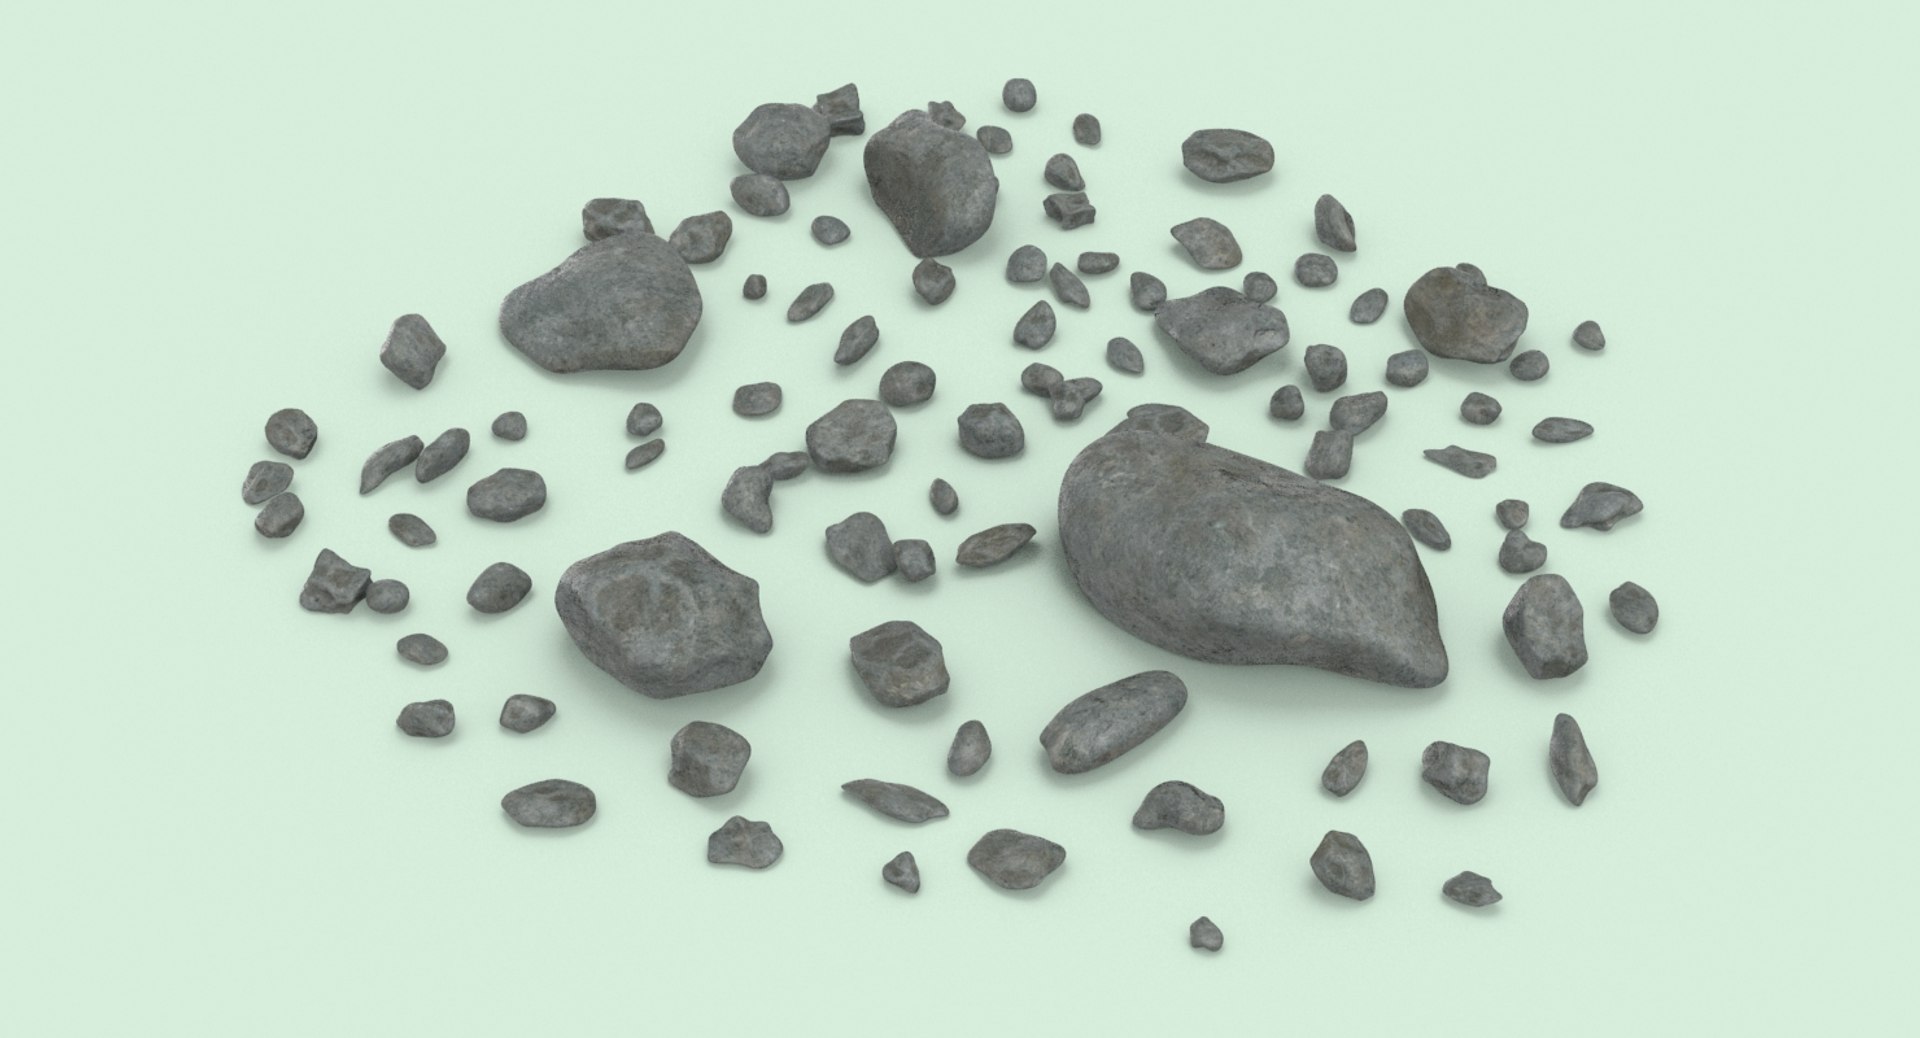 25,880 Small Pile Rocks Images, Stock Photos, 3D objects